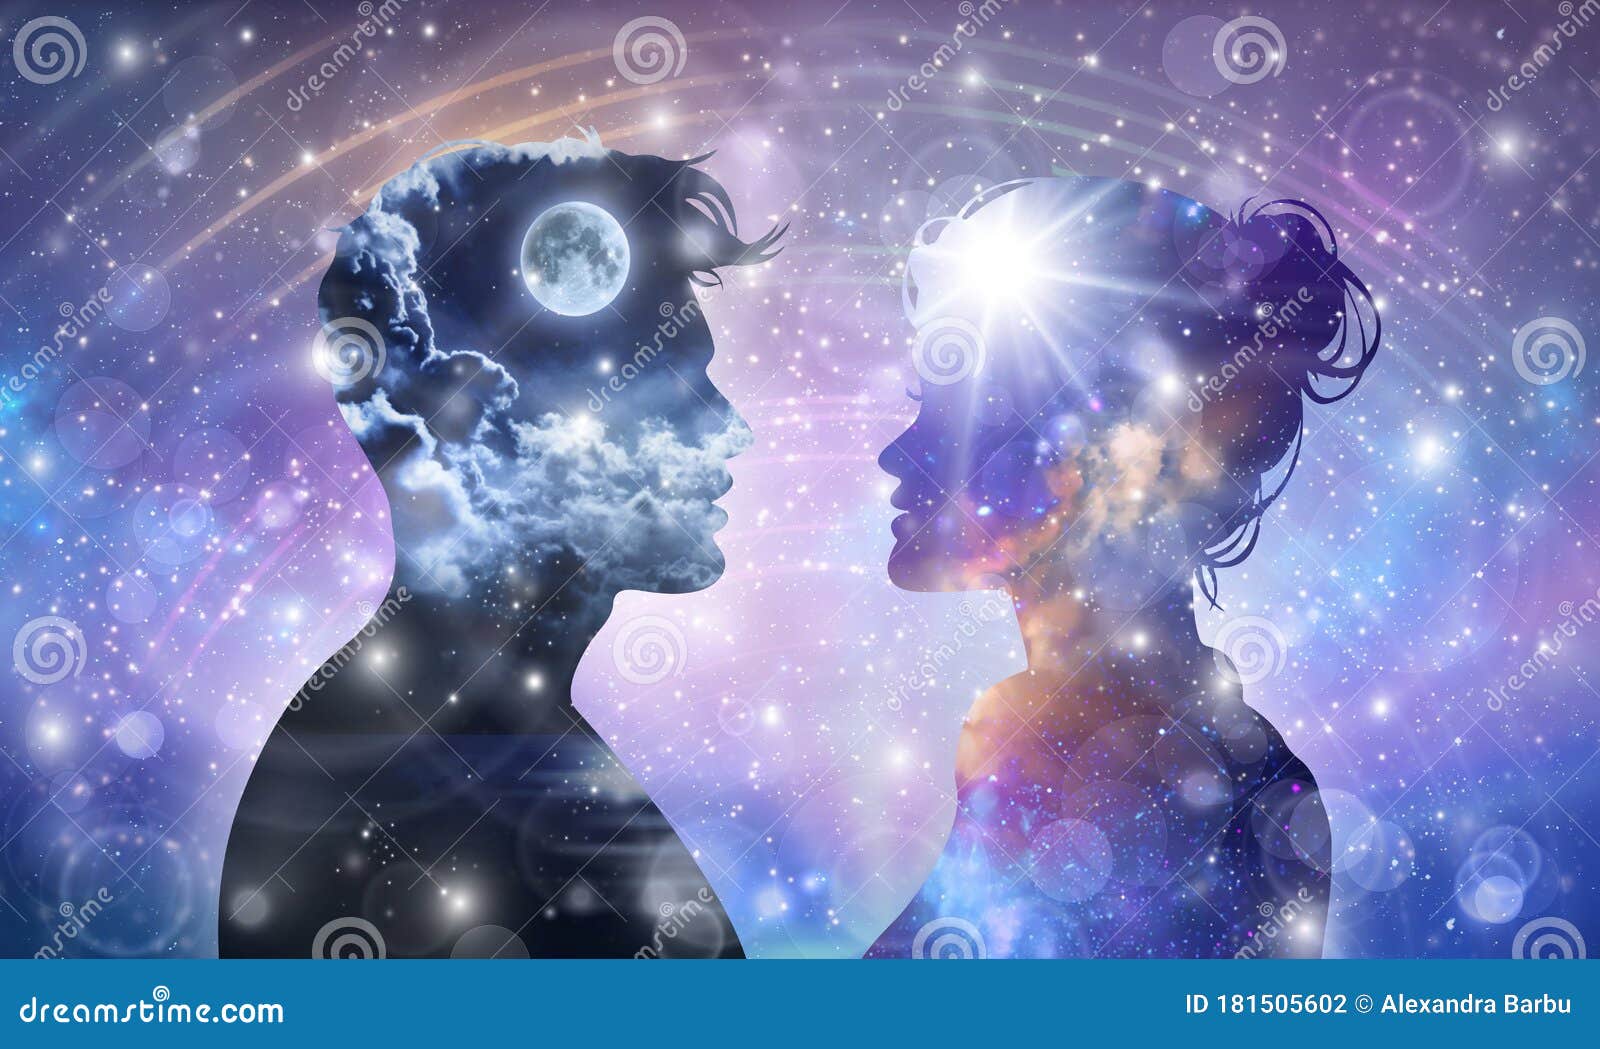 human male, female bodies, universe inspiration enlightenment unity consciousness, yin yang, twin flames, cosmic lovers